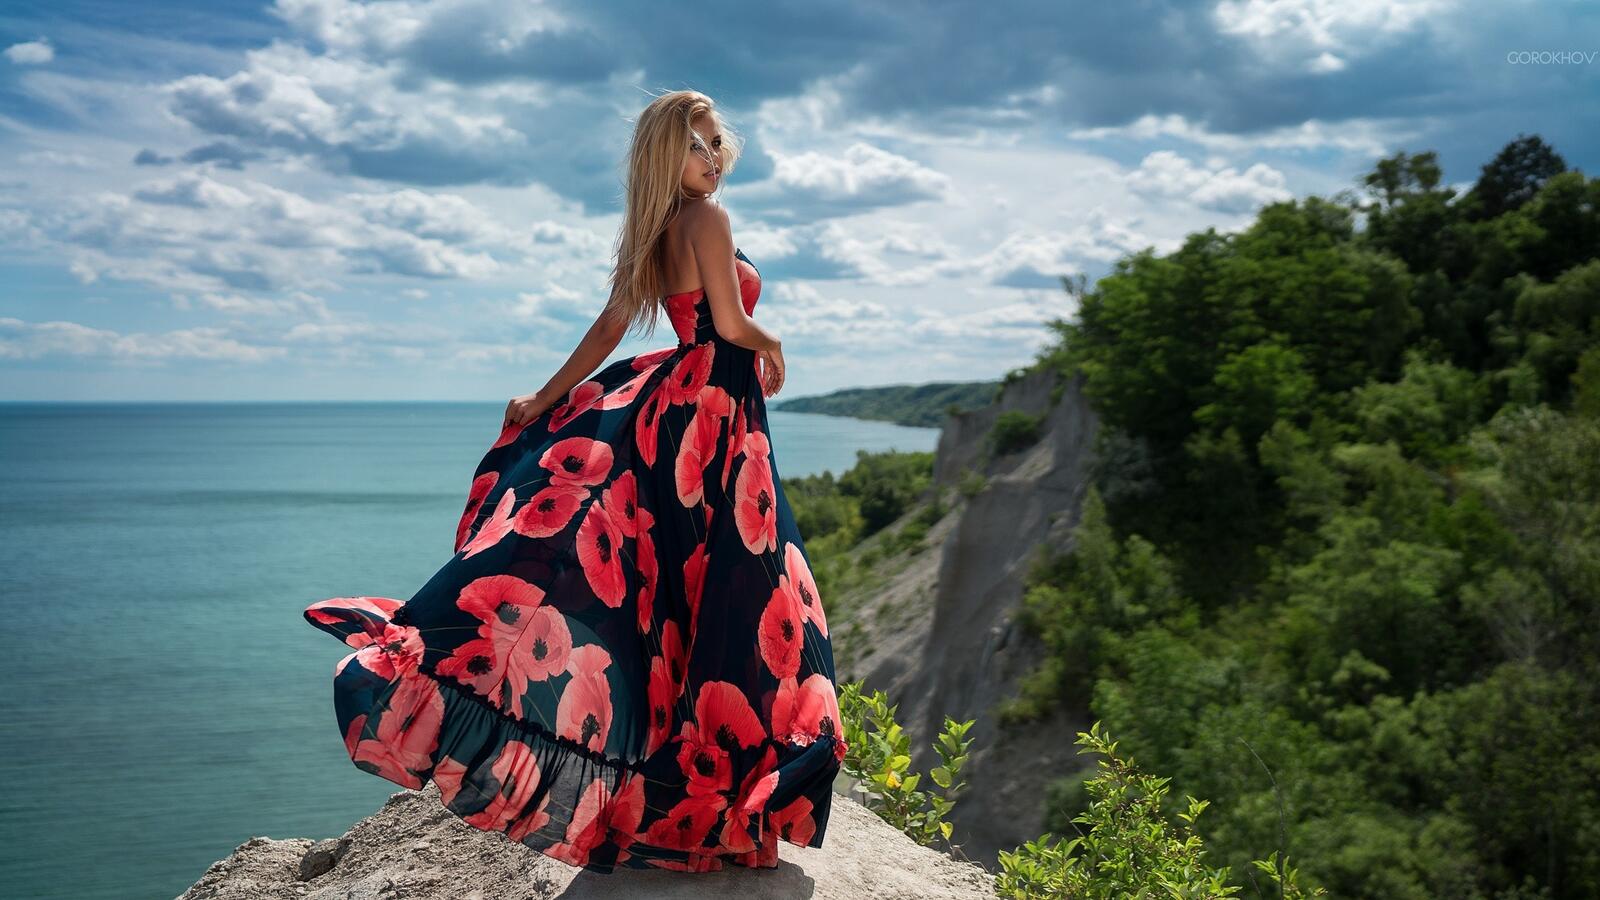 Free photo A blonde-haired girl in a dress stands on the edge of a cliff